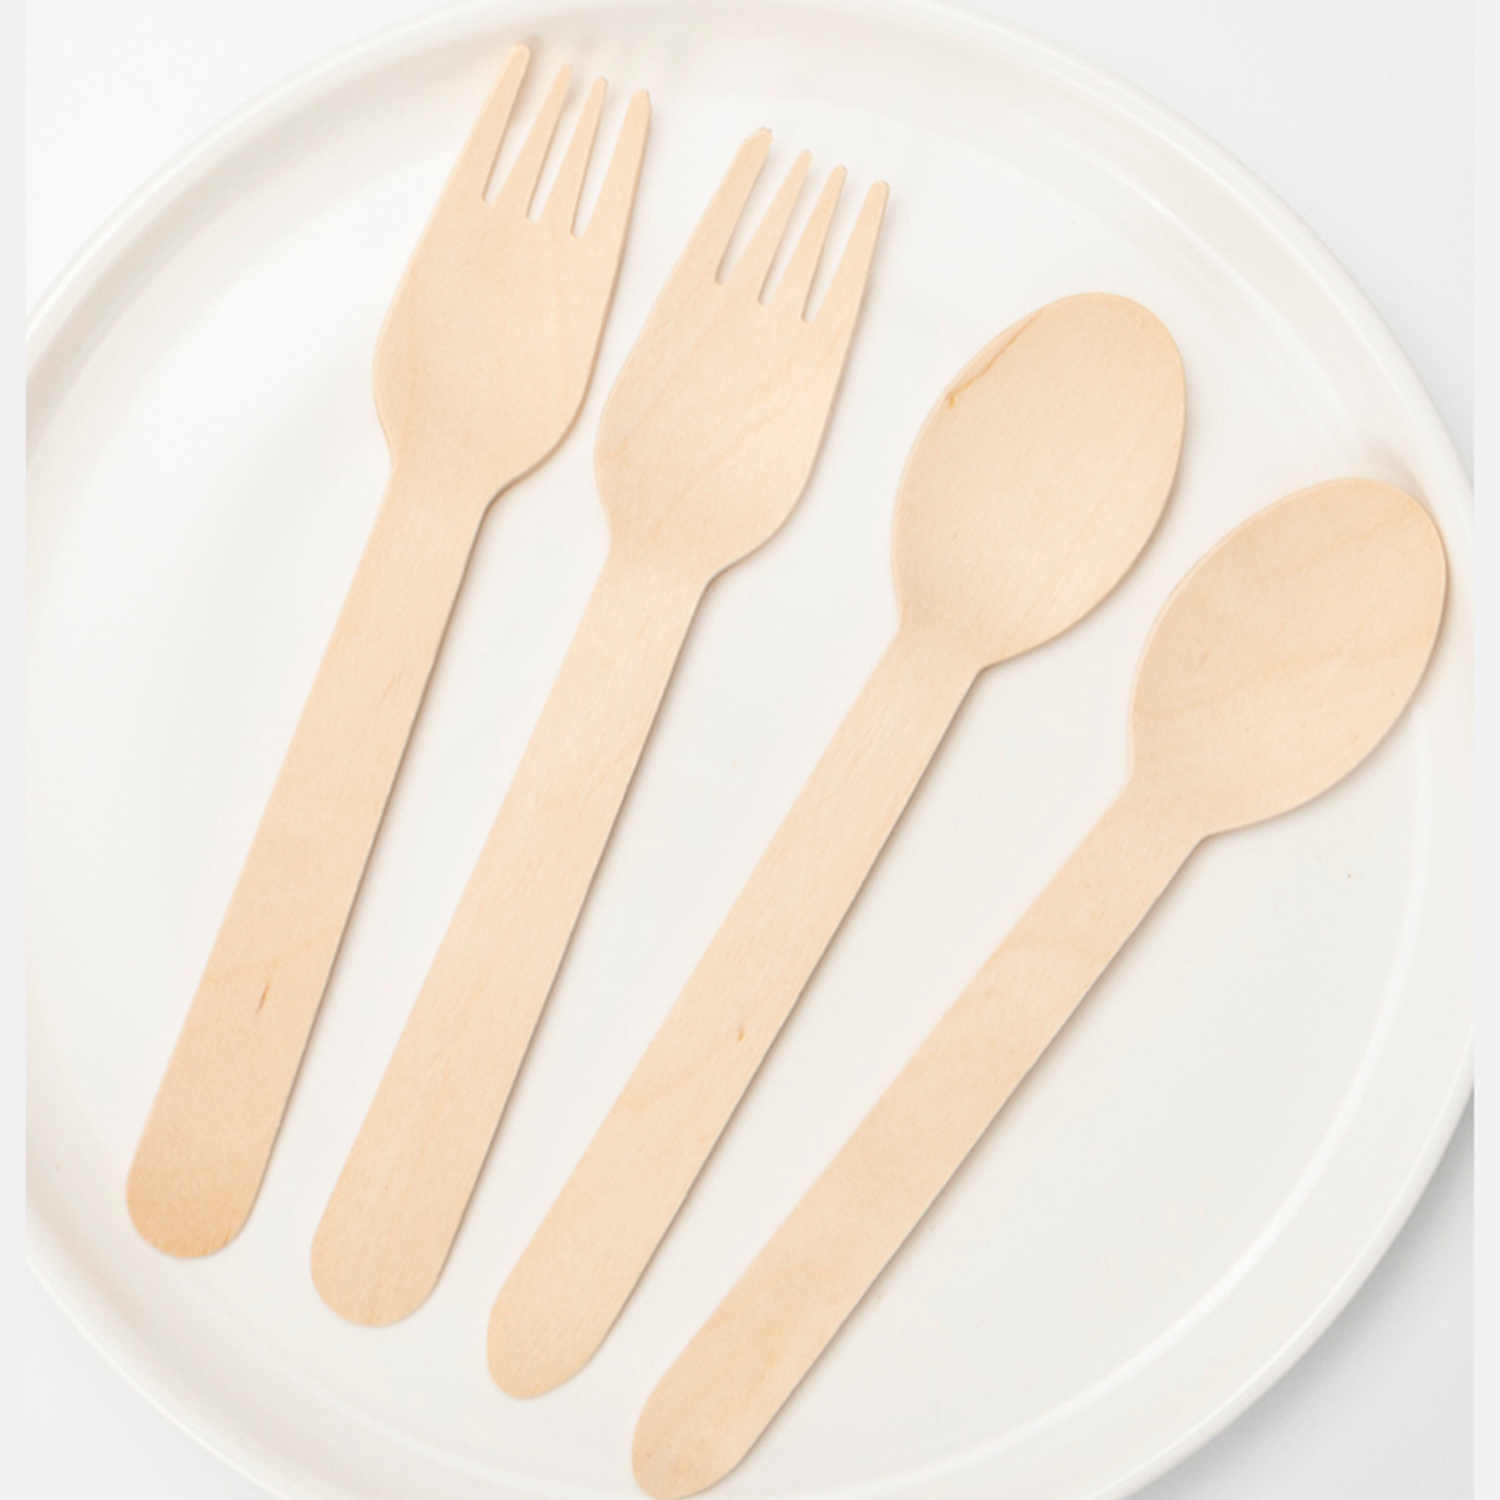 Wooden fork spoon disposable fork spoon